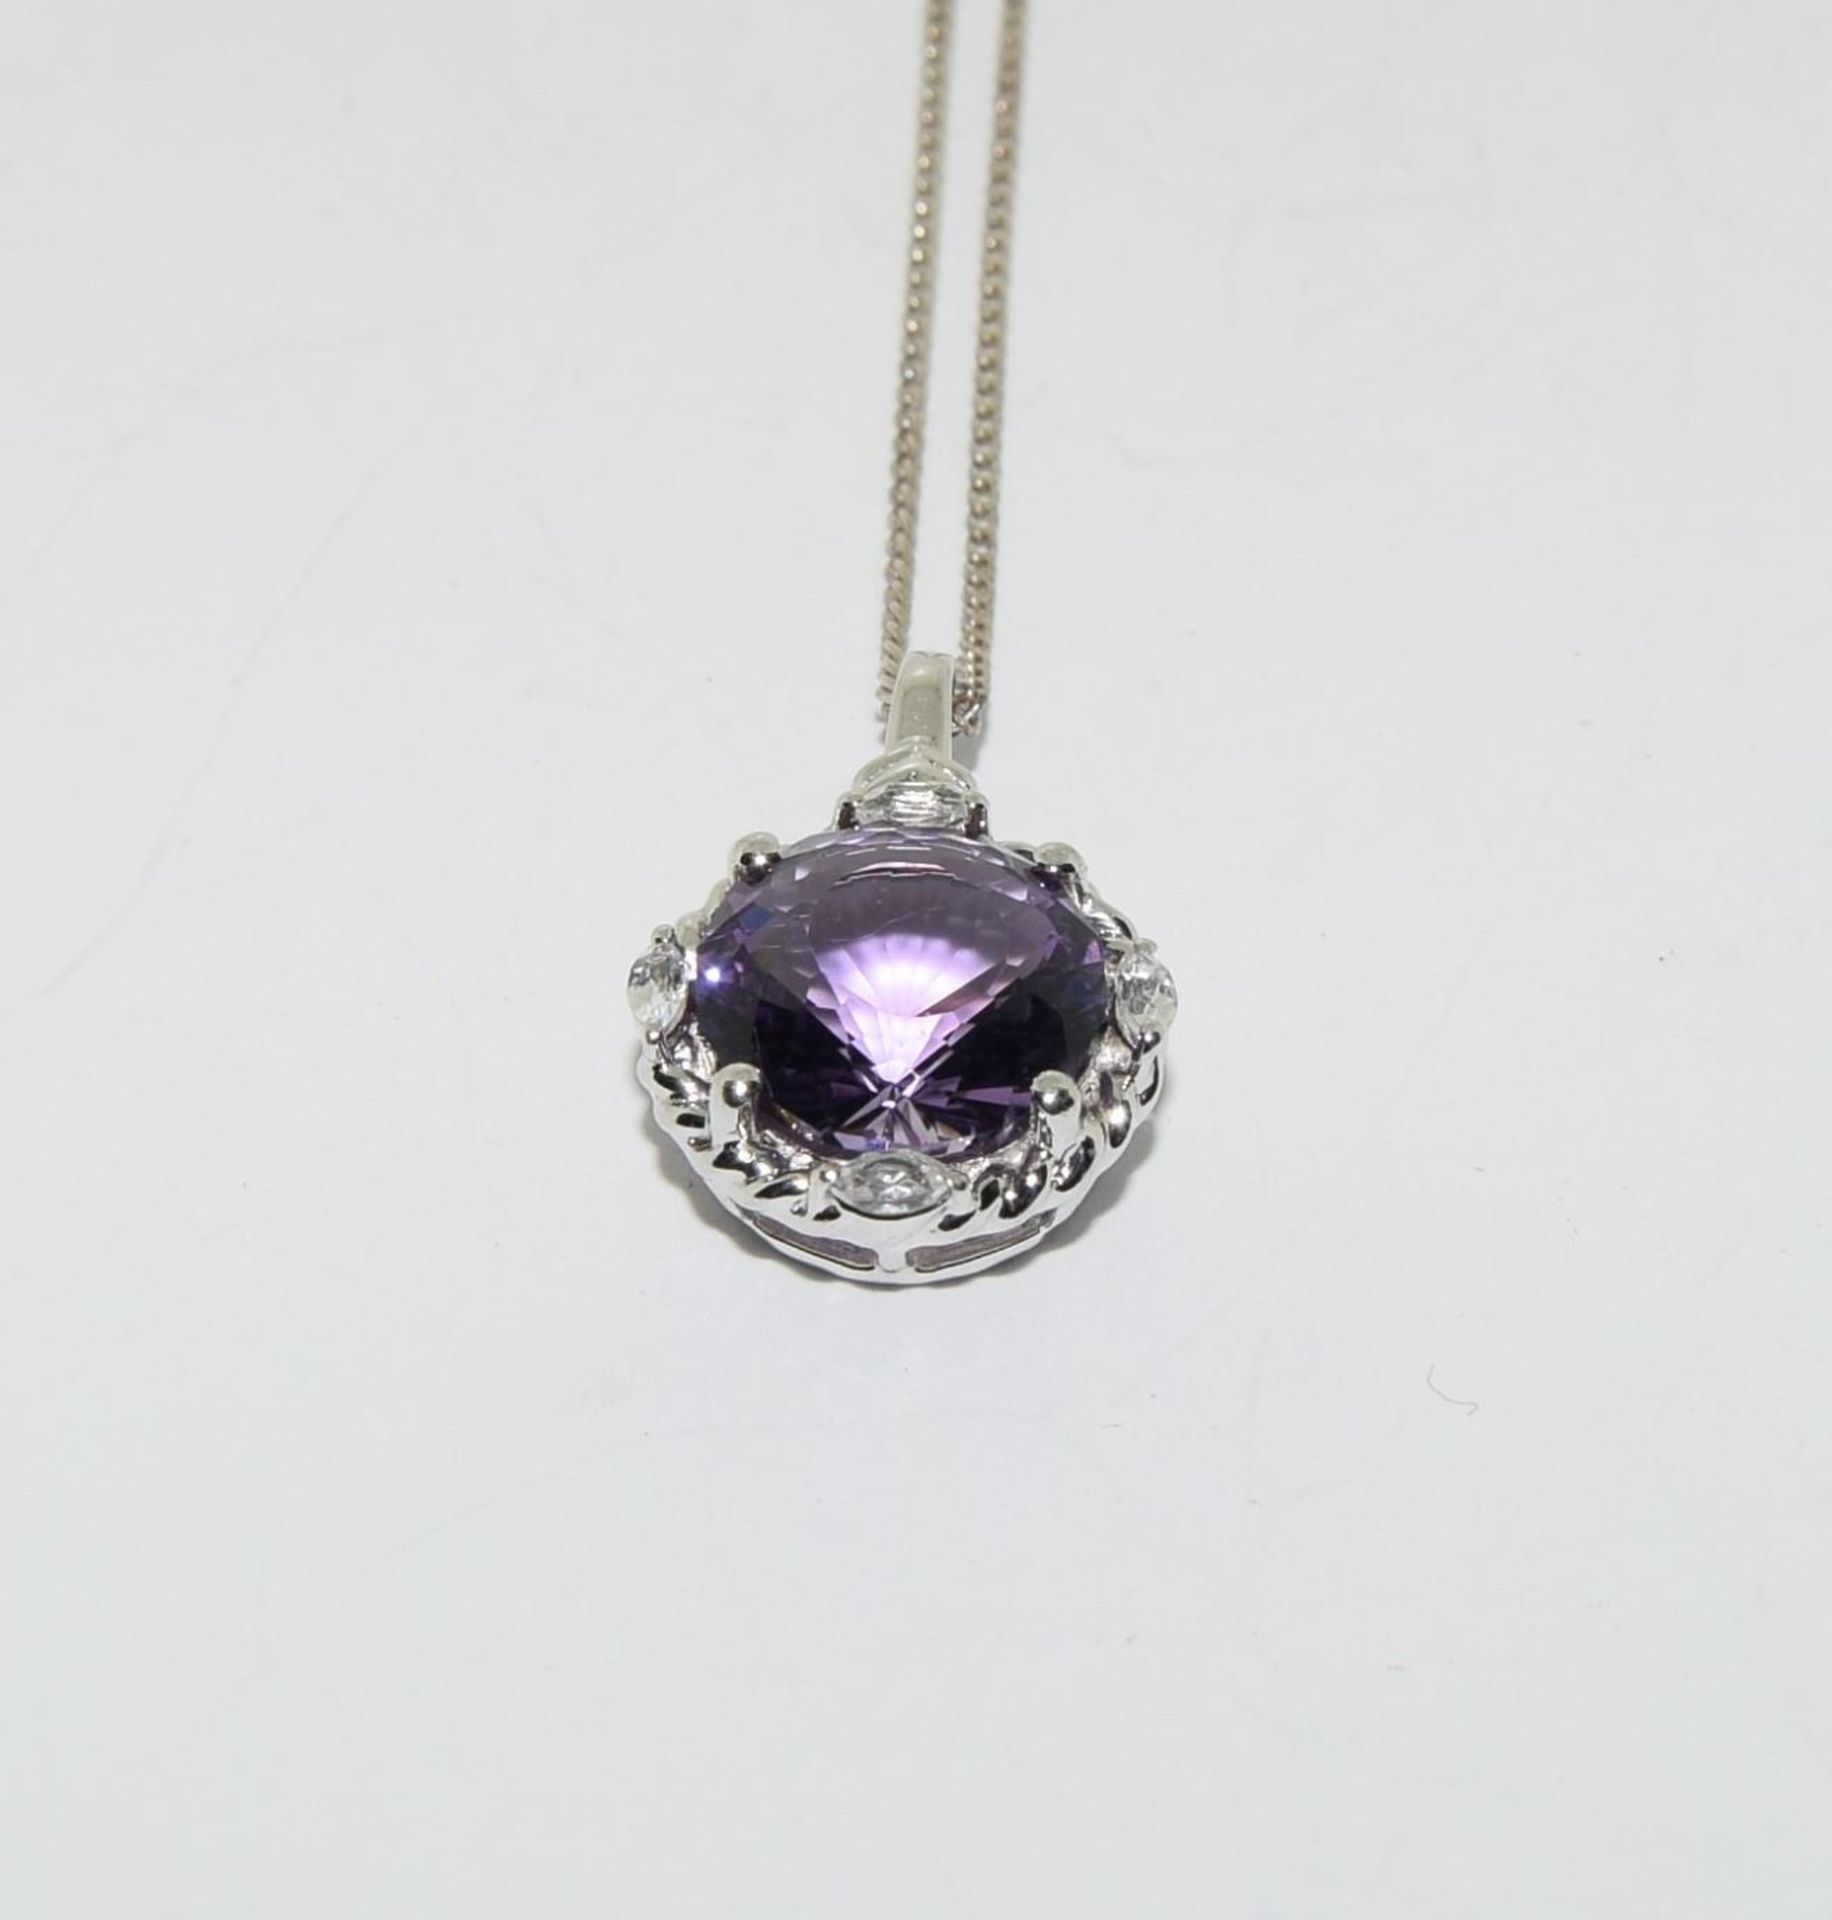 Victorian inspired amethyst 925 solitaire pendant.